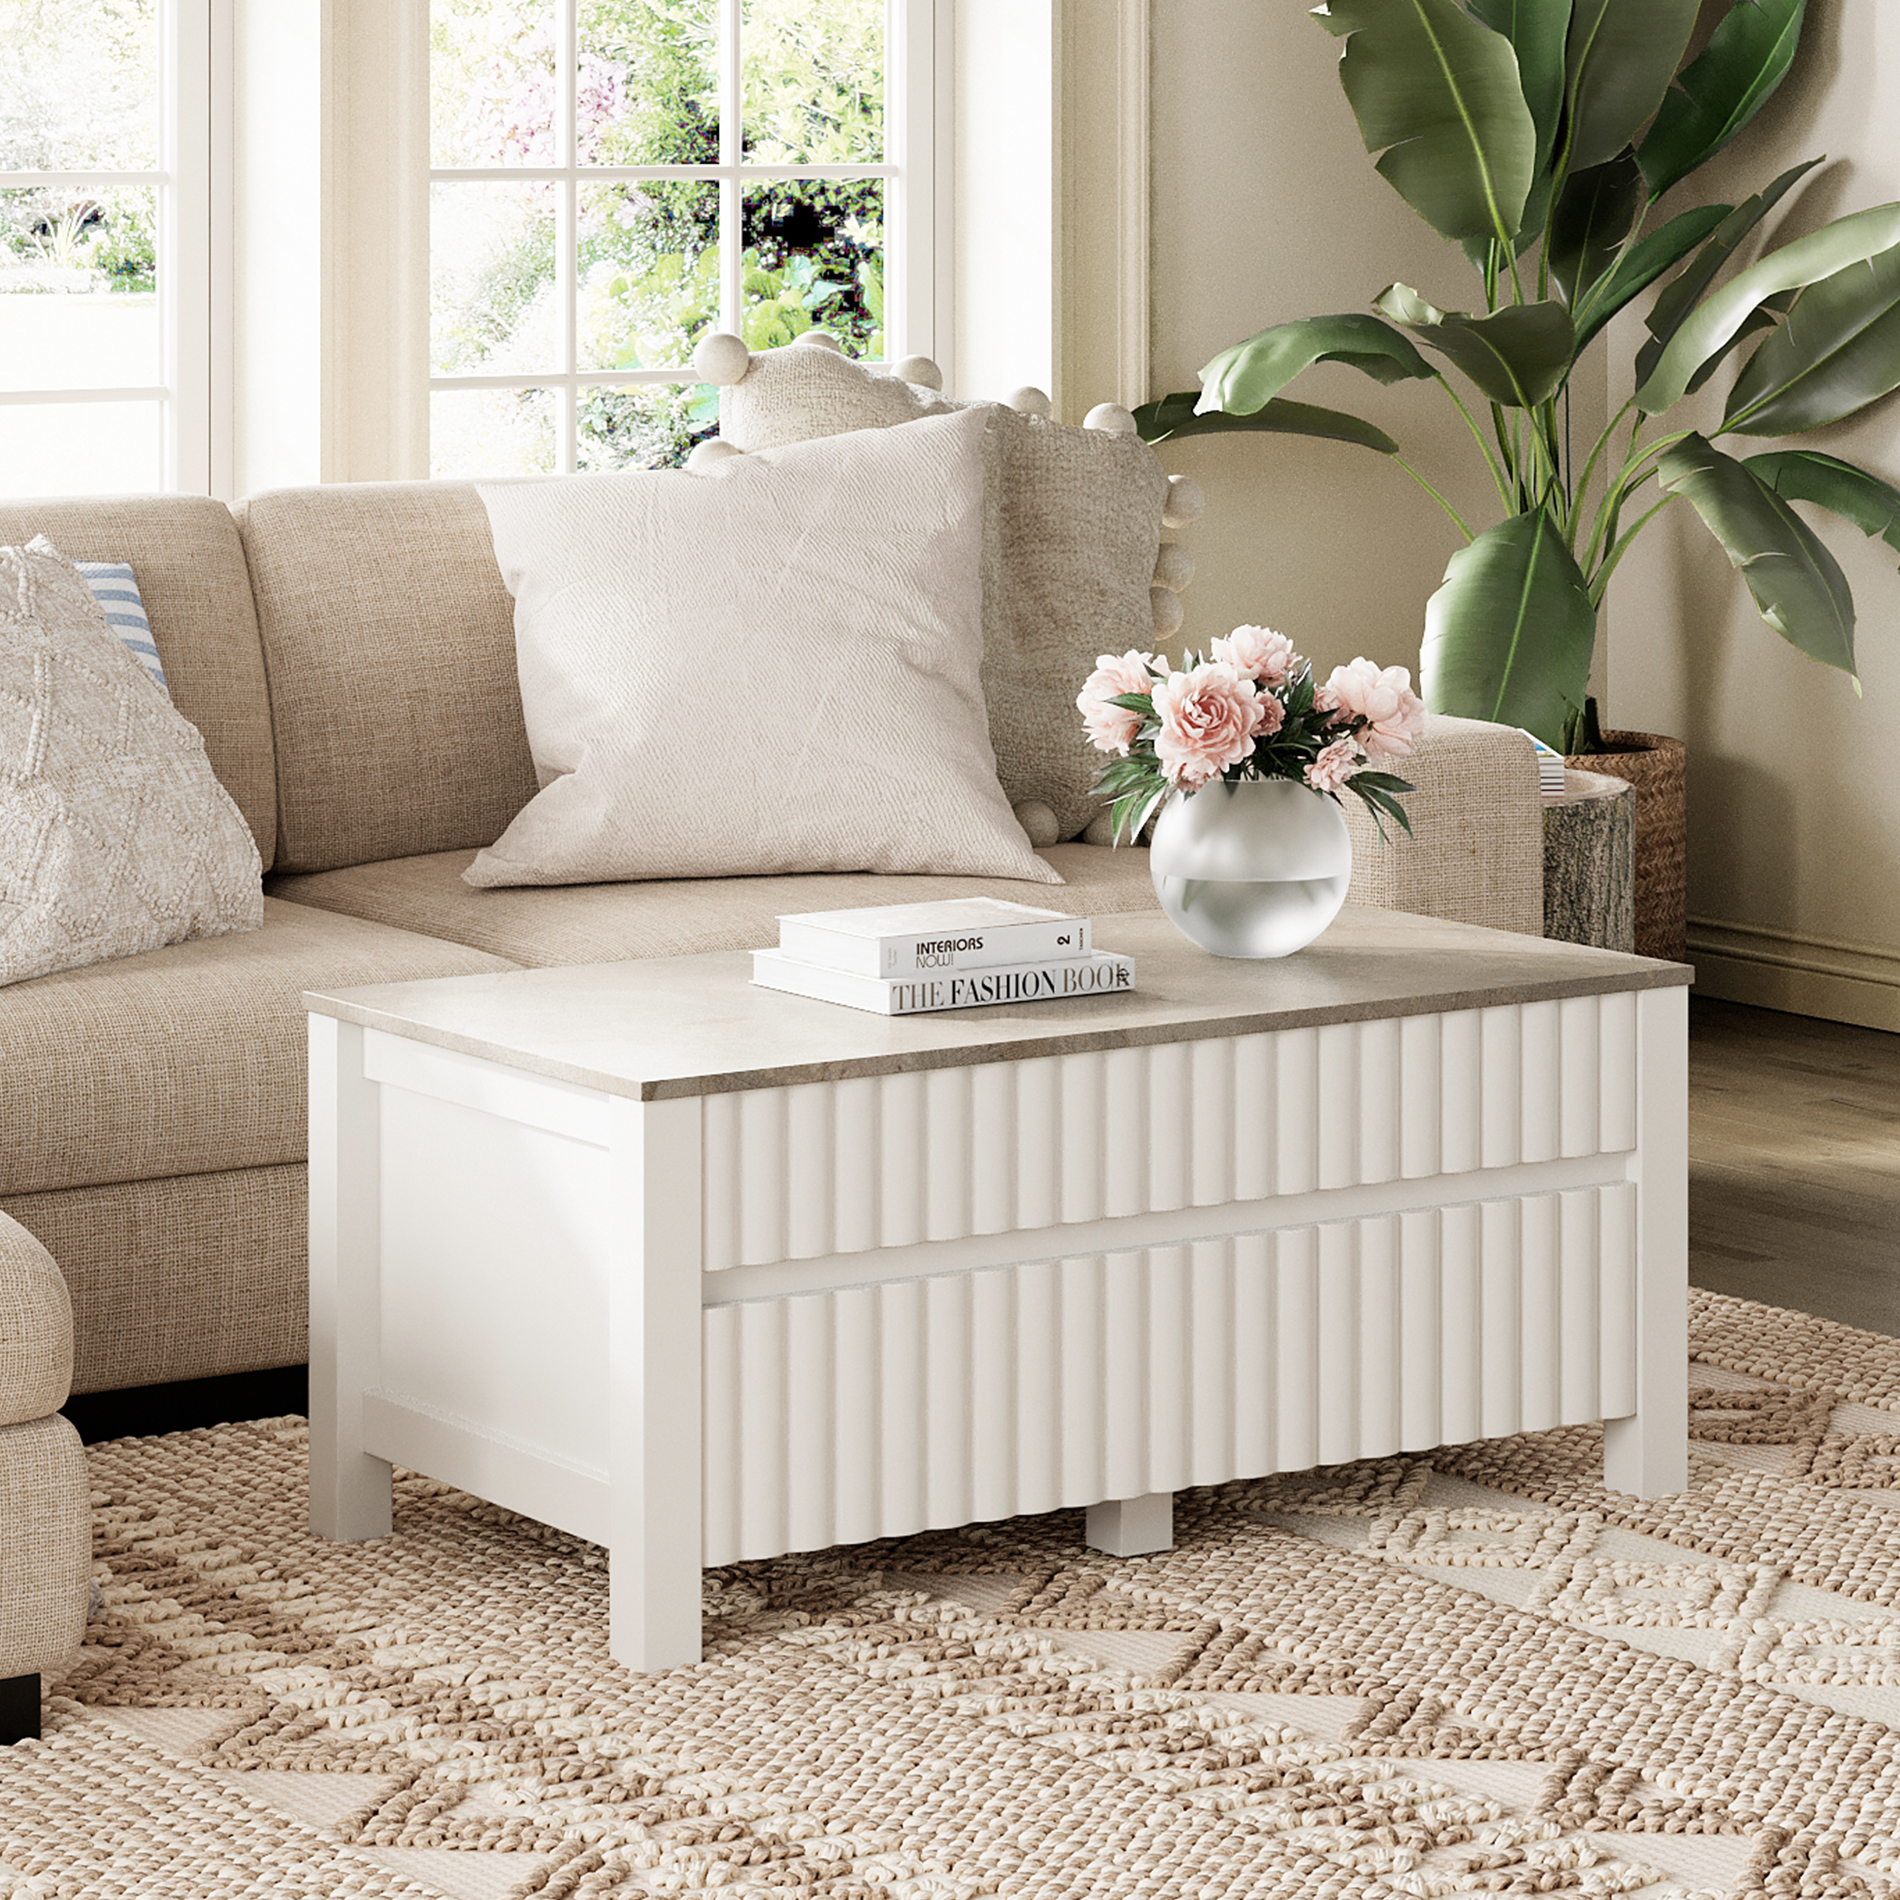 Modern Coffee Table with Sliding Drawers for Living Room, White - image 2 of 6